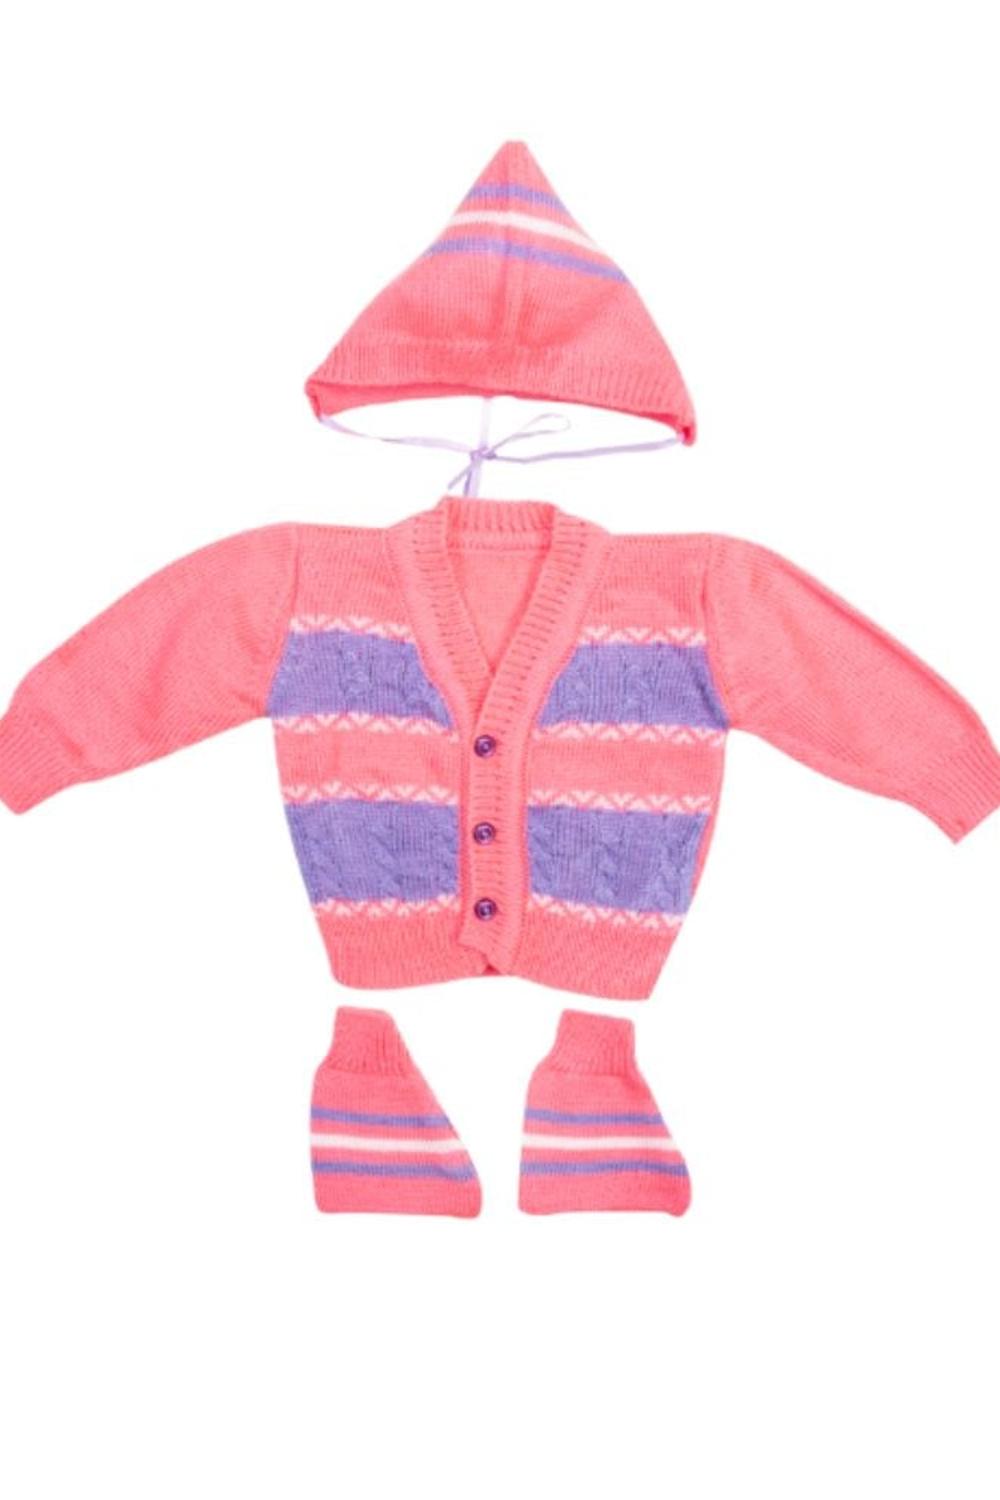 Mee Mee Baby Sweater SetsPink_Blue